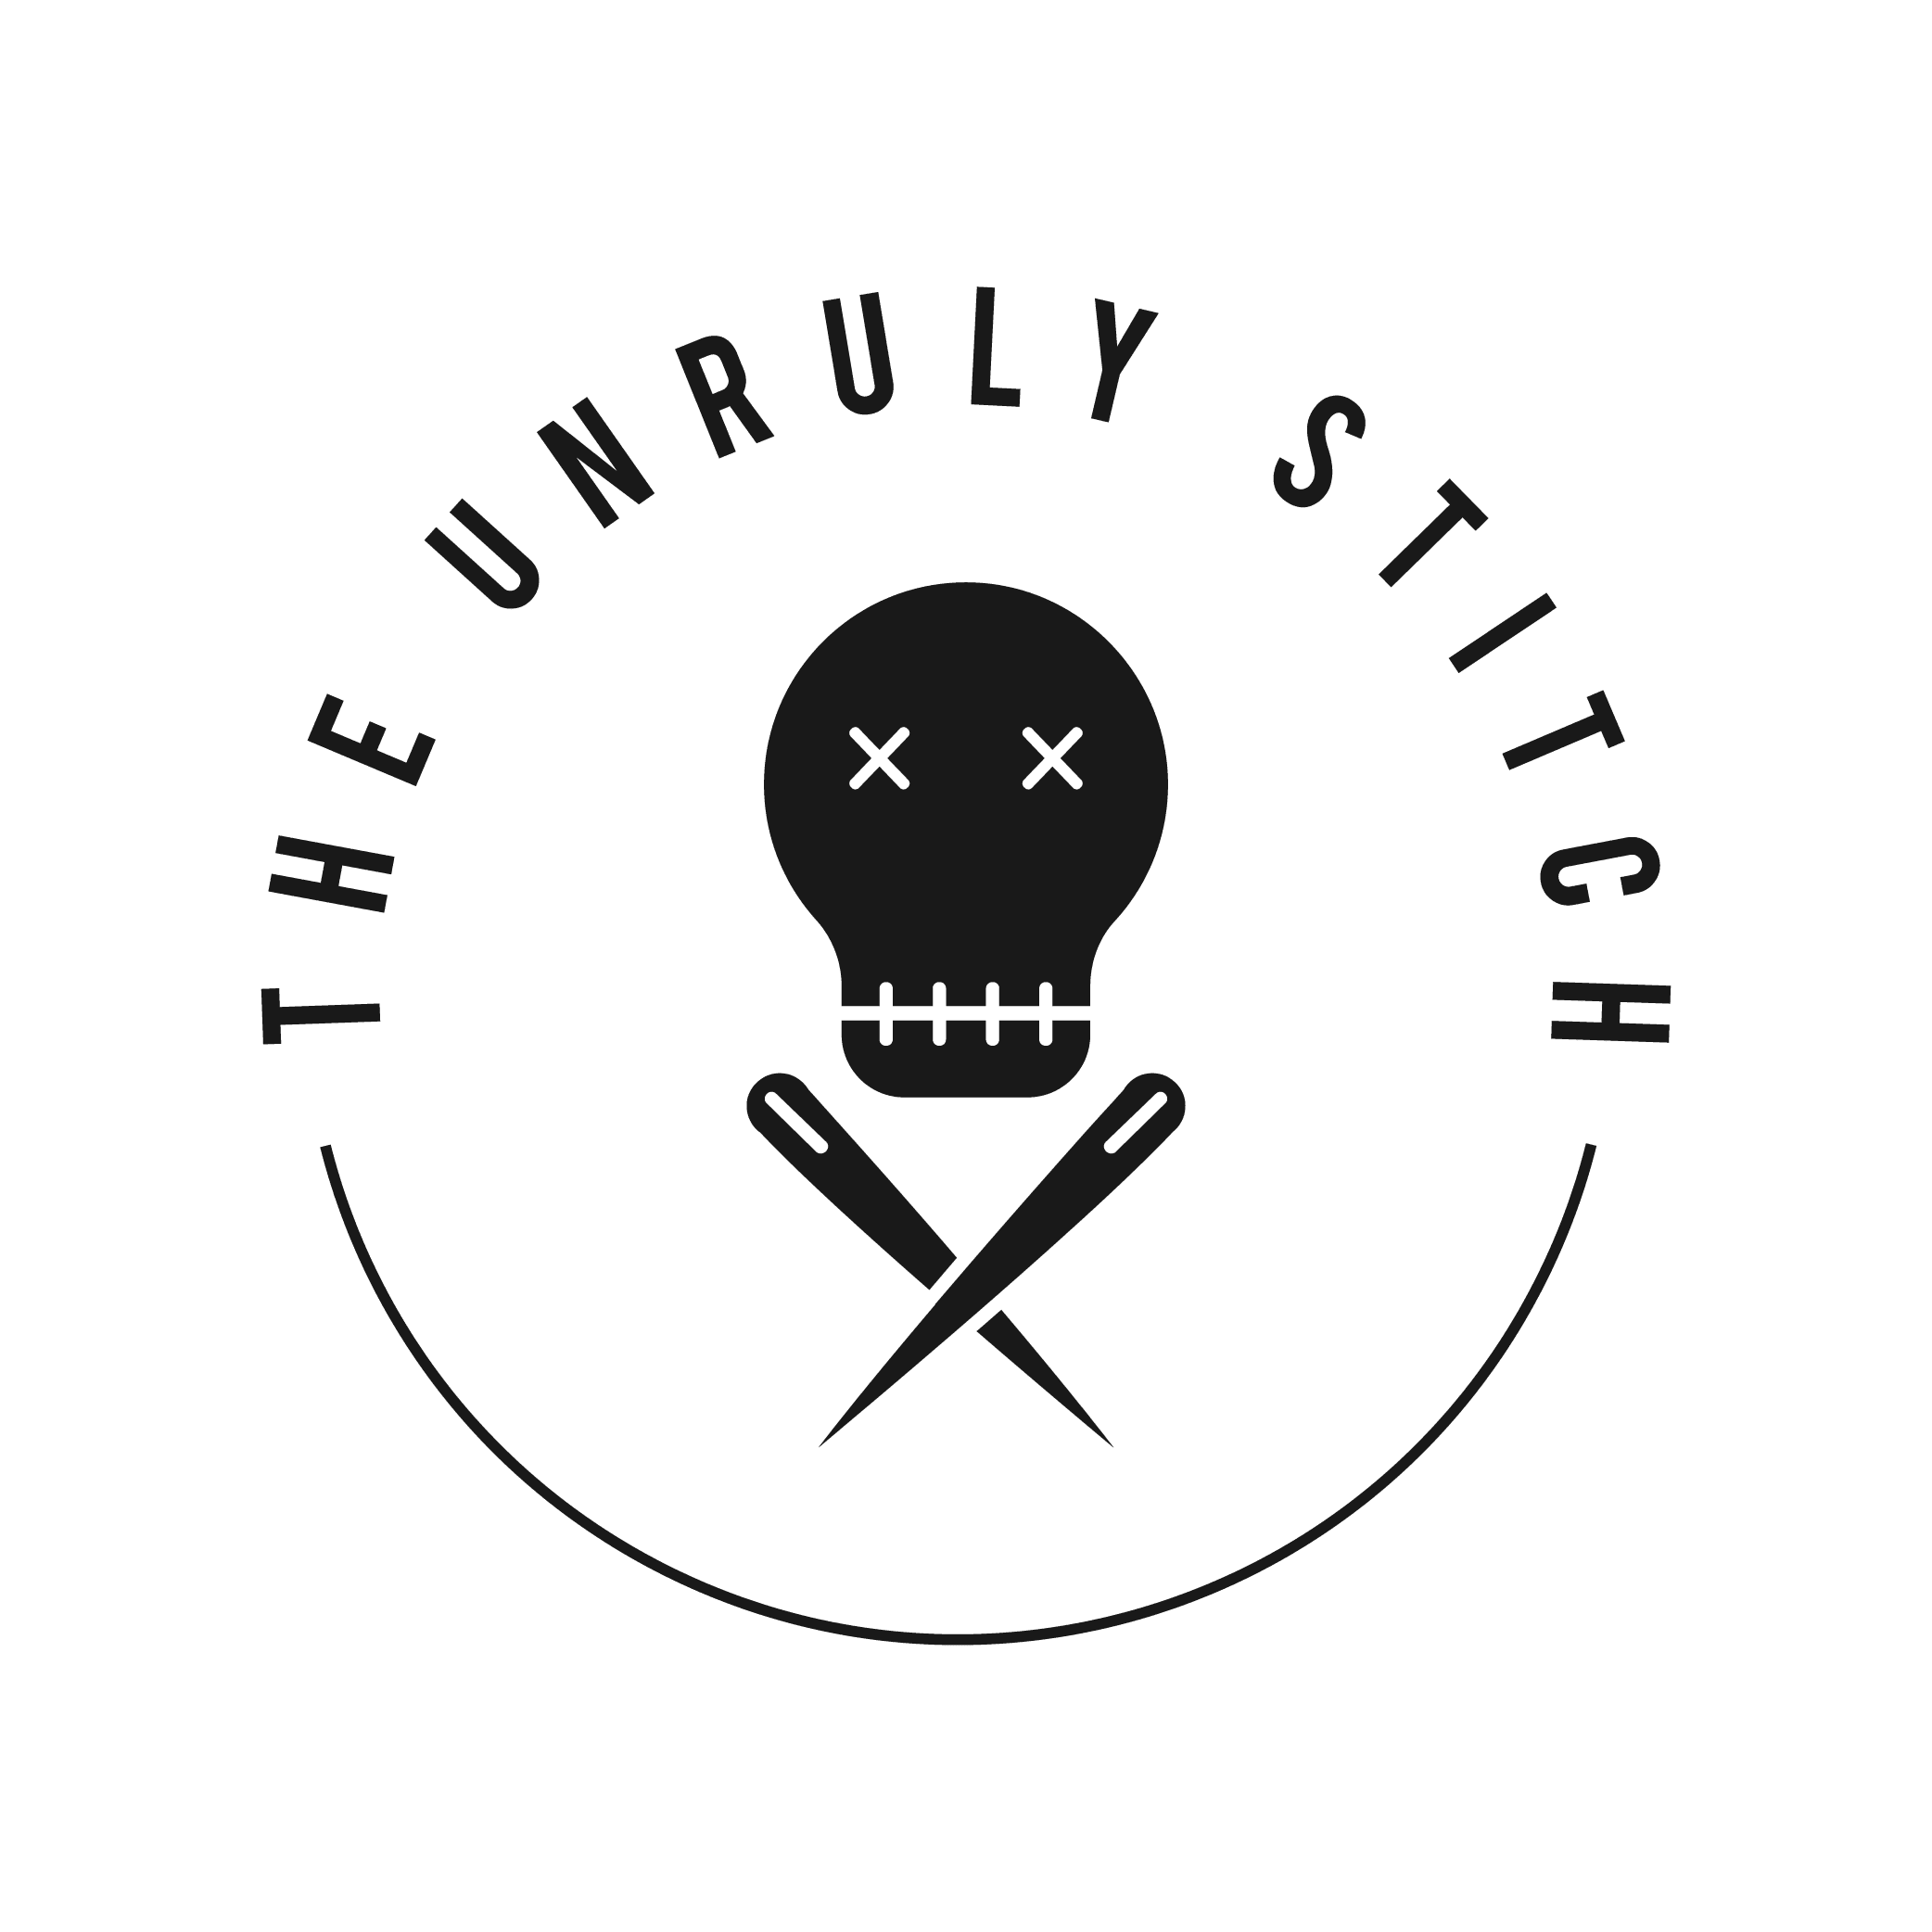 The Unruly Stitch logo - skull over two crossed sewing needles